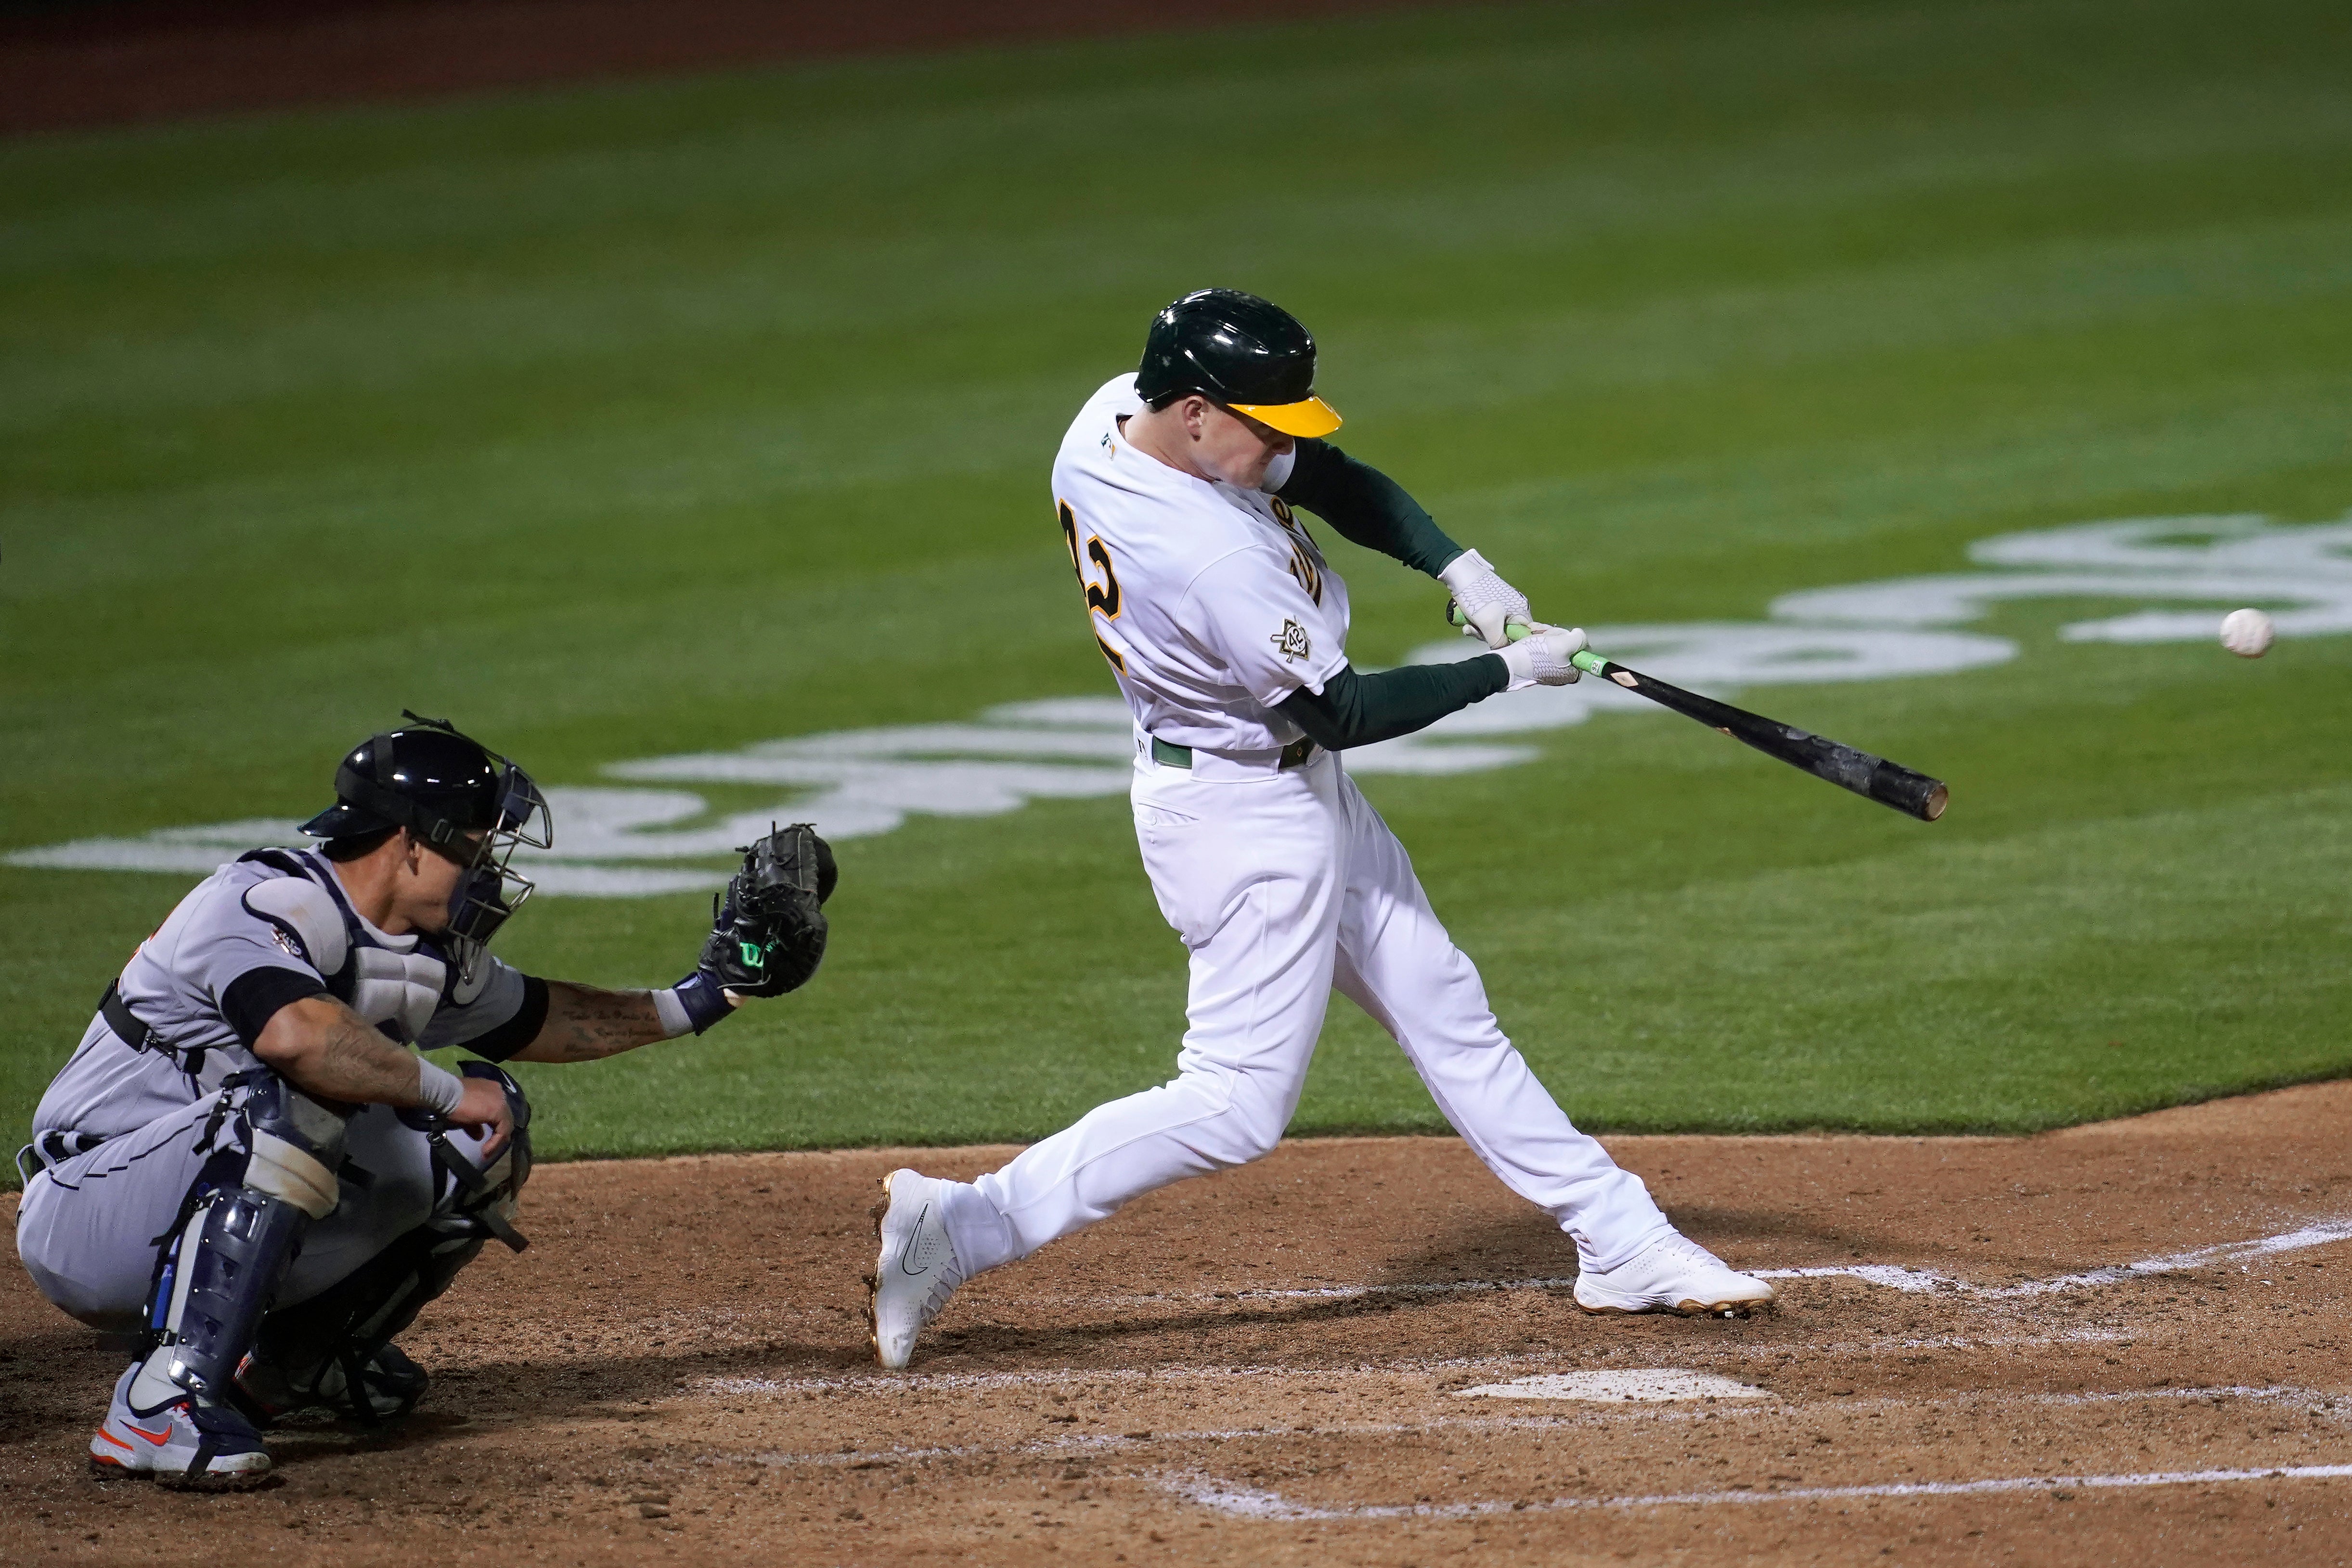 Major League Baseball has seen record view numbers on its streaming service, MLB.TV